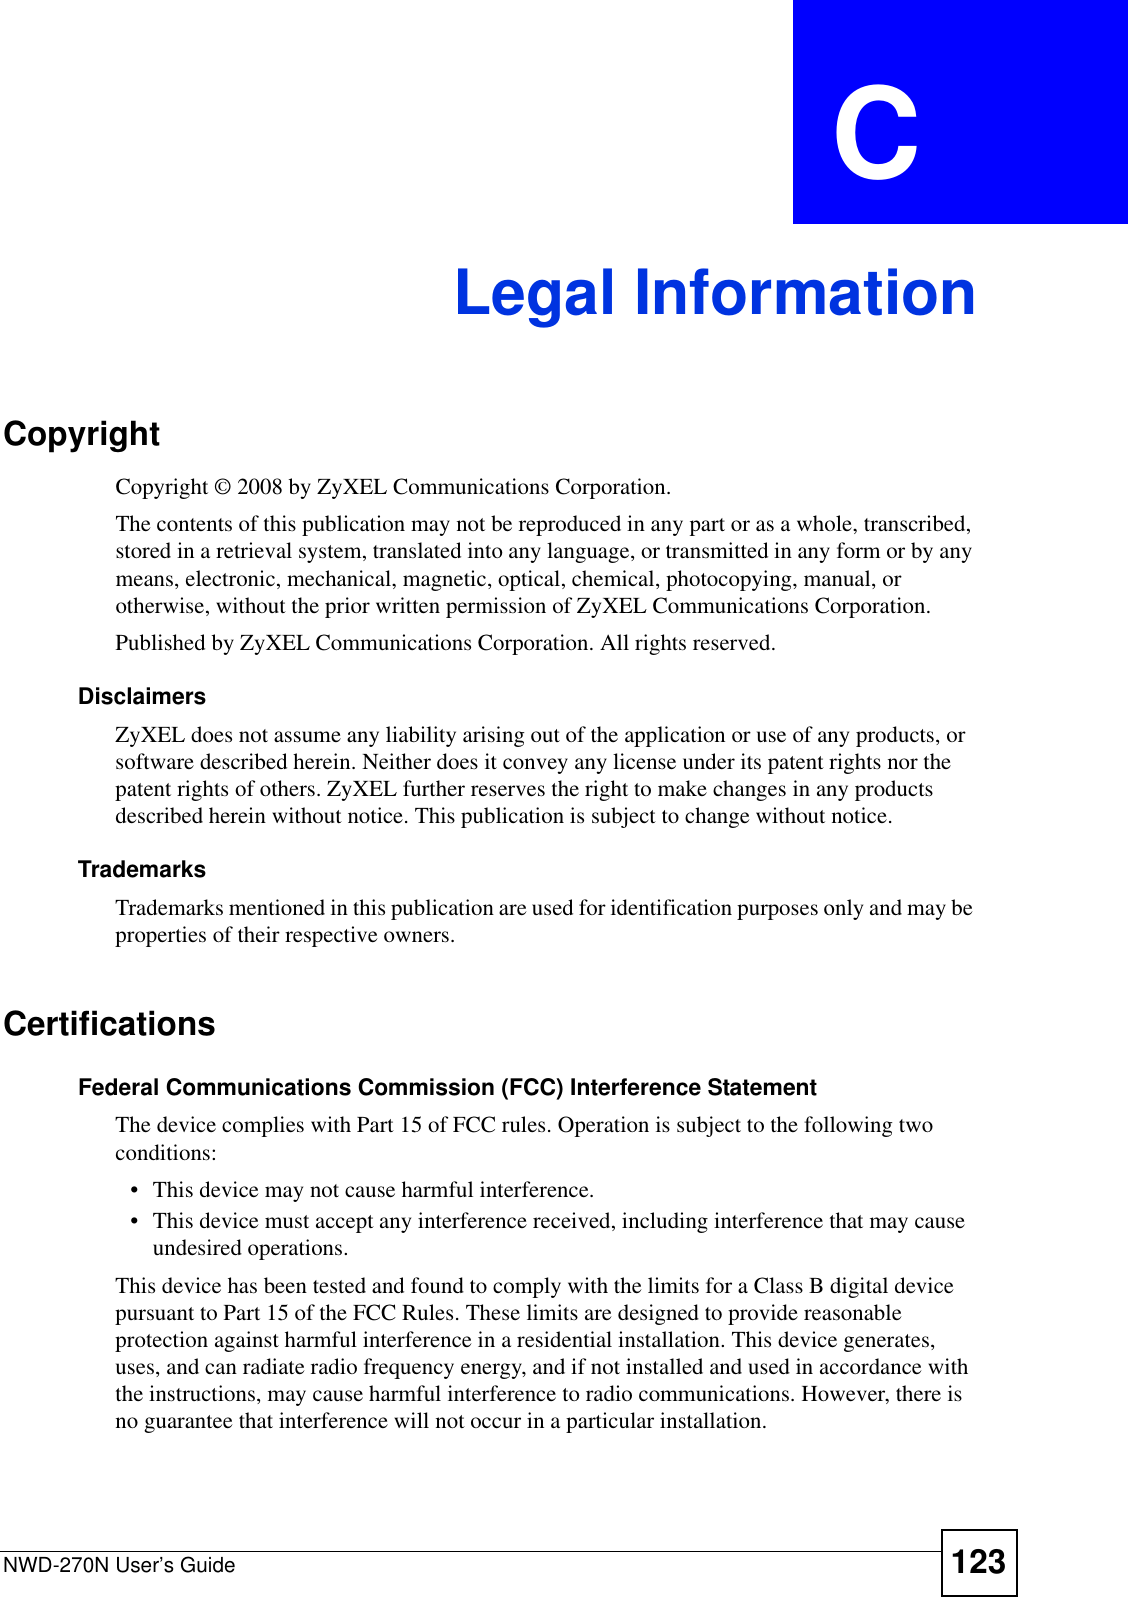 NWD-270N User’s Guide 123APPENDIX  C Legal InformationCopyrightCopyright © 2008 by ZyXEL Communications Corporation.The contents of this publication may not be reproduced in any part or as a whole, transcribed, stored in a retrieval system, translated into any language, or transmitted in any form or by any means, electronic, mechanical, magnetic, optical, chemical, photocopying, manual, or otherwise, without the prior written permission of ZyXEL Communications Corporation.Published by ZyXEL Communications Corporation. All rights reserved.DisclaimersZyXEL does not assume any liability arising out of the application or use of any products, or software described herein. Neither does it convey any license under its patent rights nor the patent rights of others. ZyXEL further reserves the right to make changes in any products described herein without notice. This publication is subject to change without notice.TrademarksTrademarks mentioned in this publication are used for identification purposes only and may be properties of their respective owners.CertificationsFederal Communications Commission (FCC) Interference StatementThe device complies with Part 15 of FCC rules. Operation is subject to the following two conditions:• This device may not cause harmful interference.• This device must accept any interference received, including interference that may cause undesired operations.This device has been tested and found to comply with the limits for a Class B digital device pursuant to Part 15 of the FCC Rules. These limits are designed to provide reasonable protection against harmful interference in a residential installation. This device generates, uses, and can radiate radio frequency energy, and if not installed and used in accordance with the instructions, may cause harmful interference to radio communications. However, there is no guarantee that interference will not occur in a particular installation.